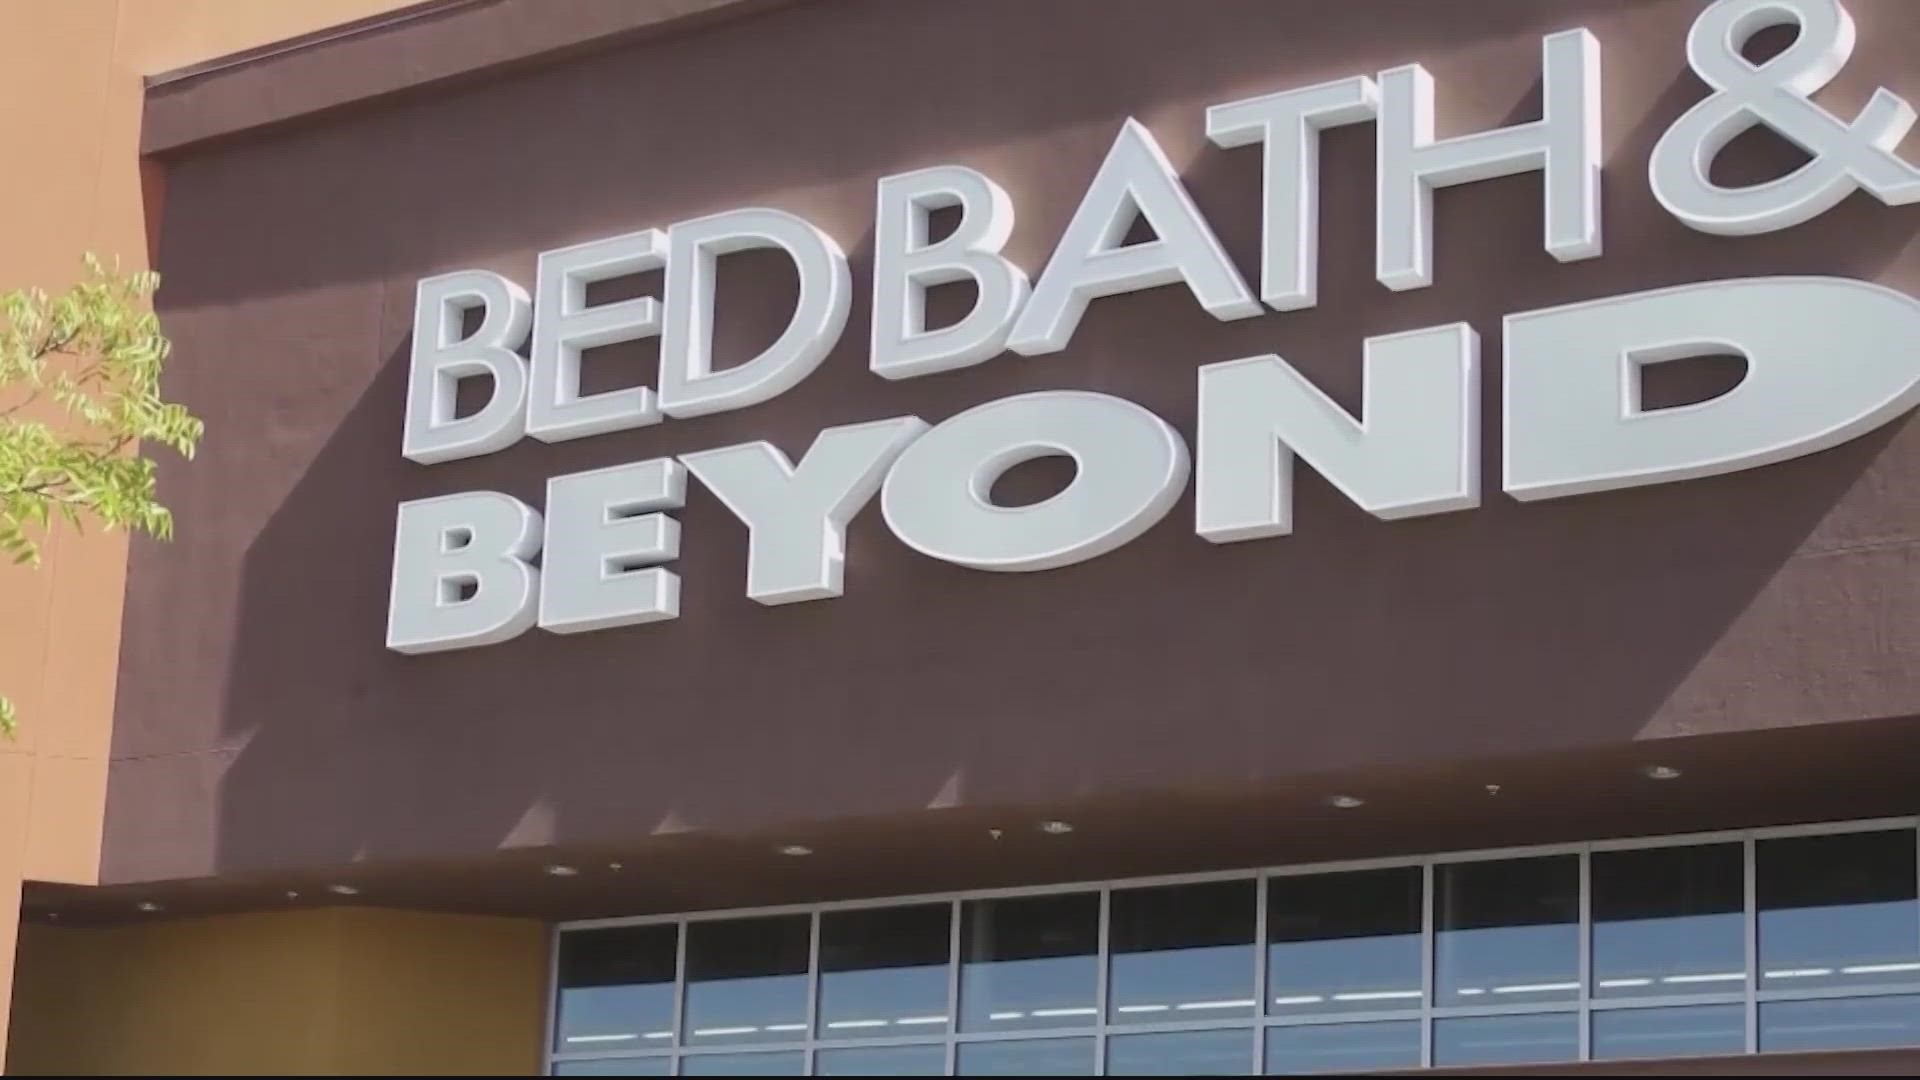 Bed Bath & Beyond announced it will be closing 87 stores and five buybuy BABY stores, in addition to 150 closures announced last year.